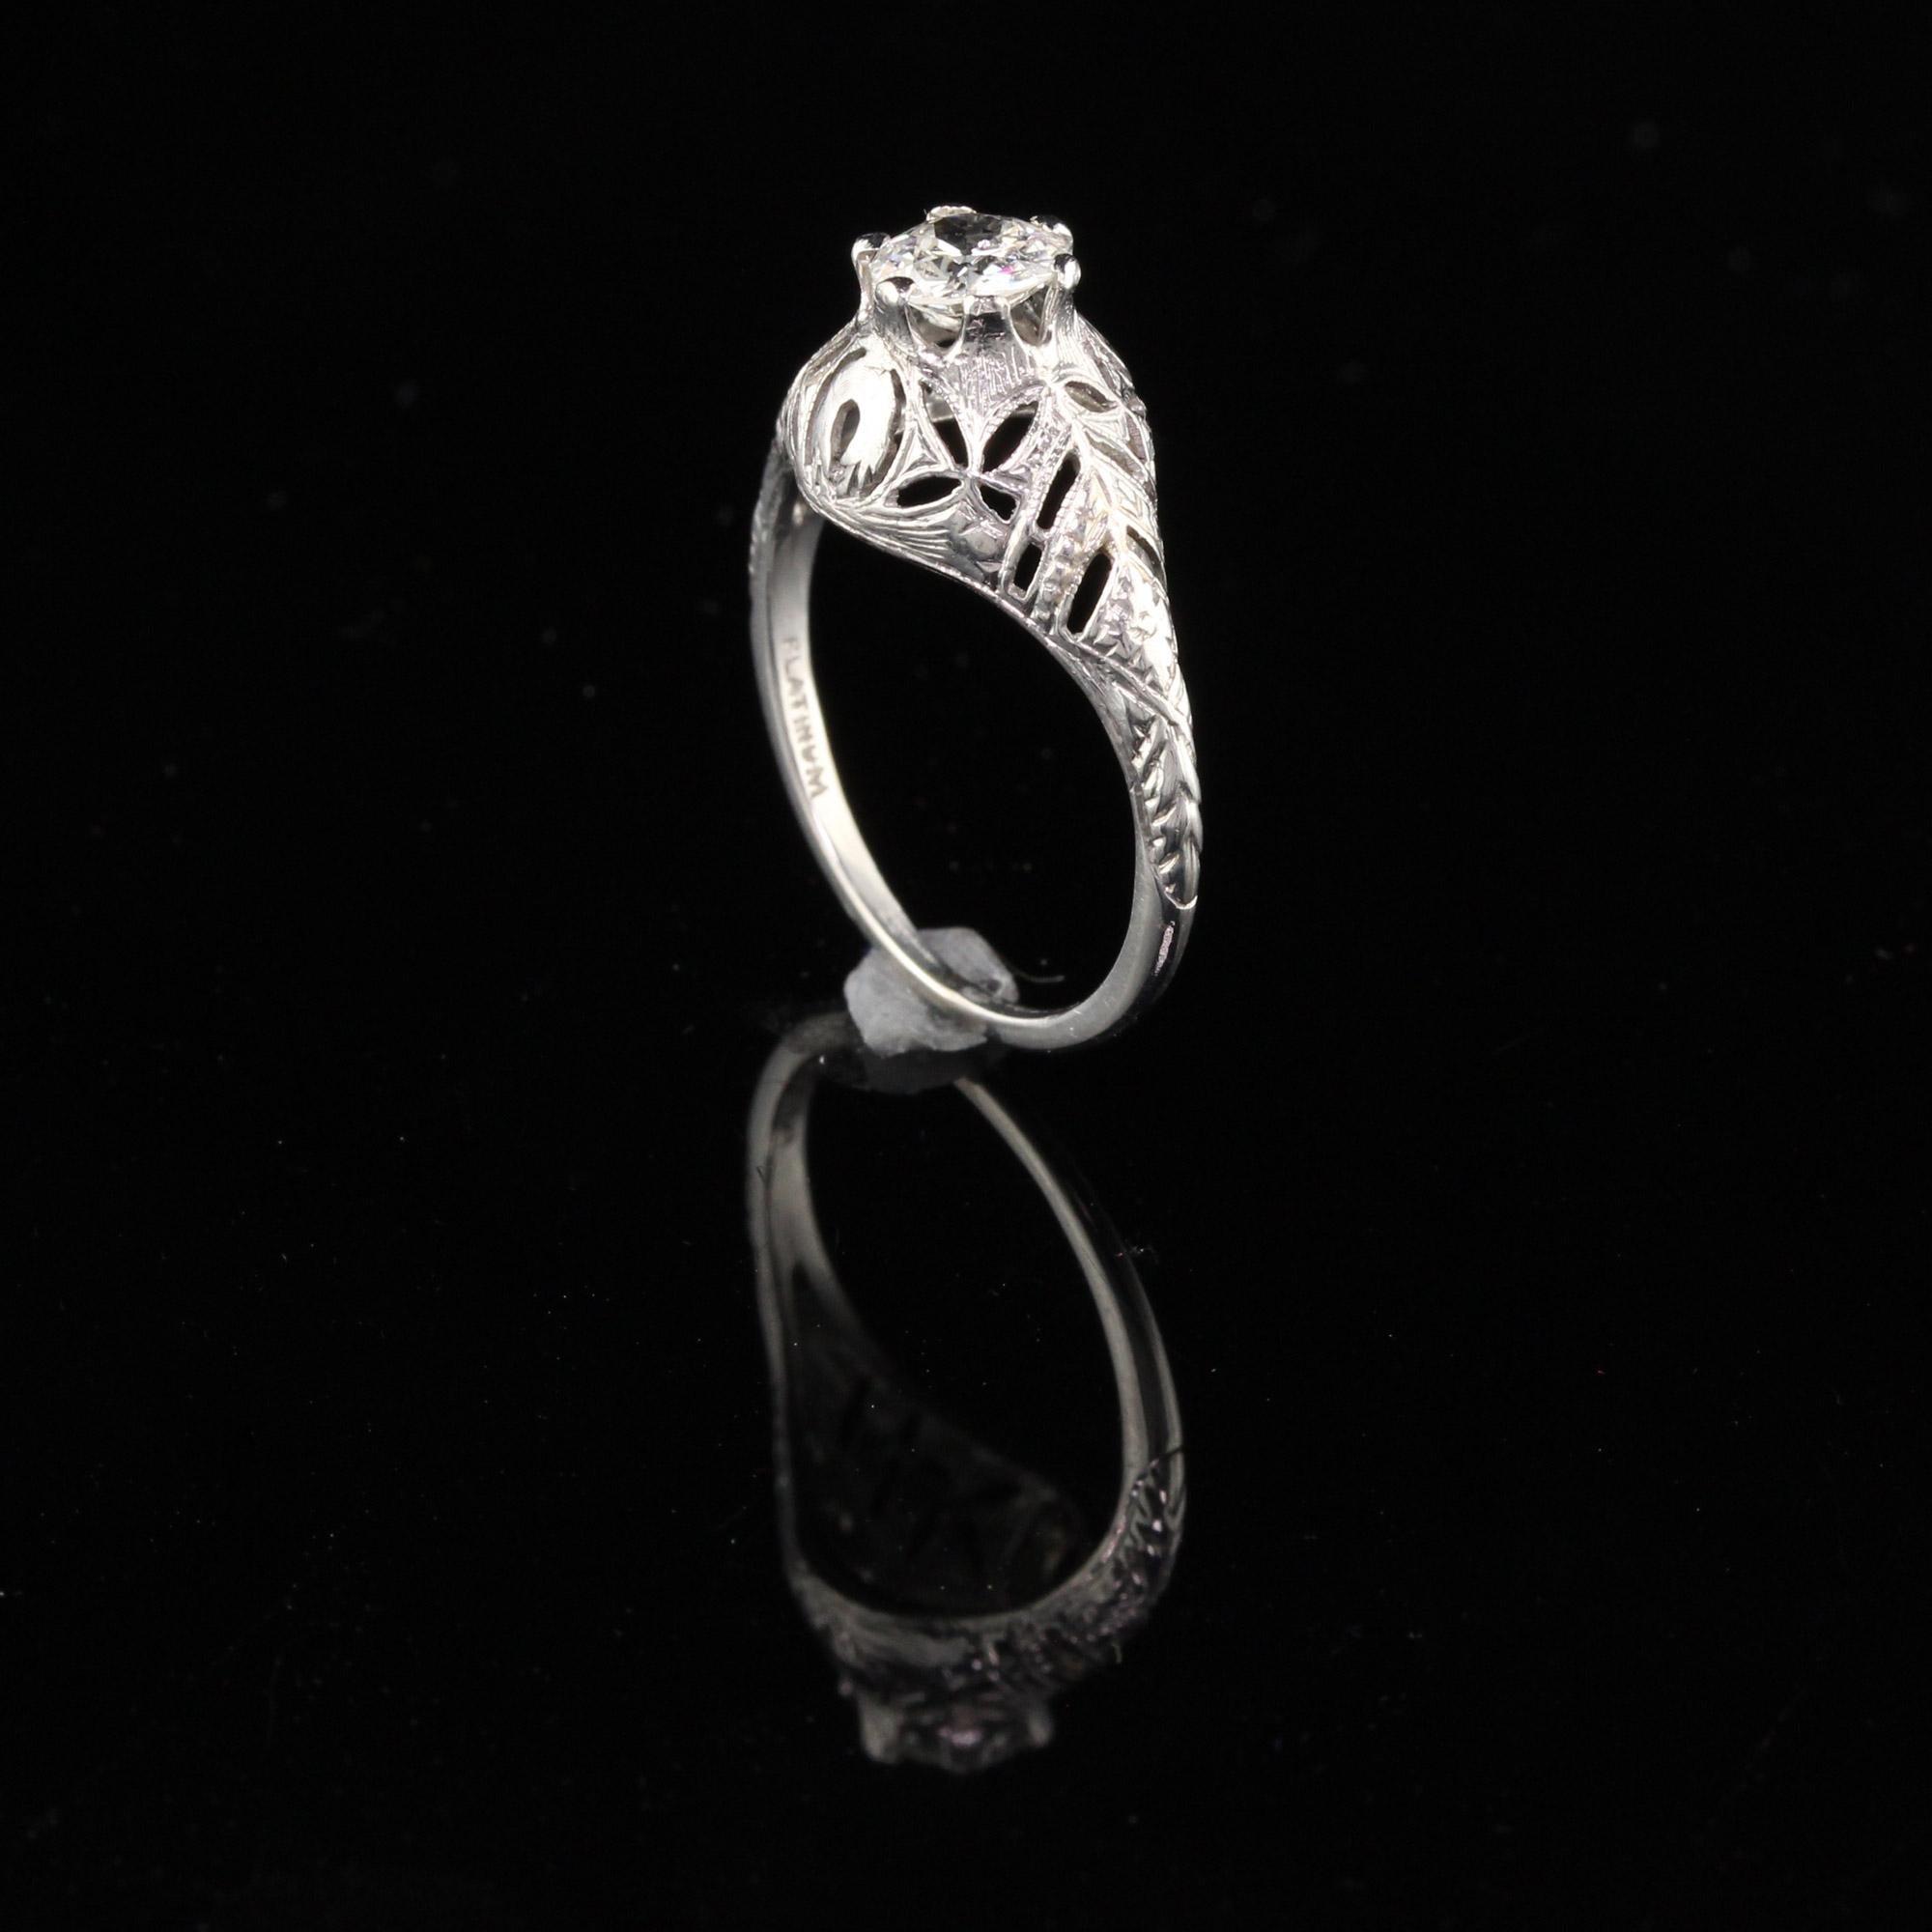 Antique Art Deco Platinum Diamond Engagement Ring In Good Condition For Sale In Great Neck, NY